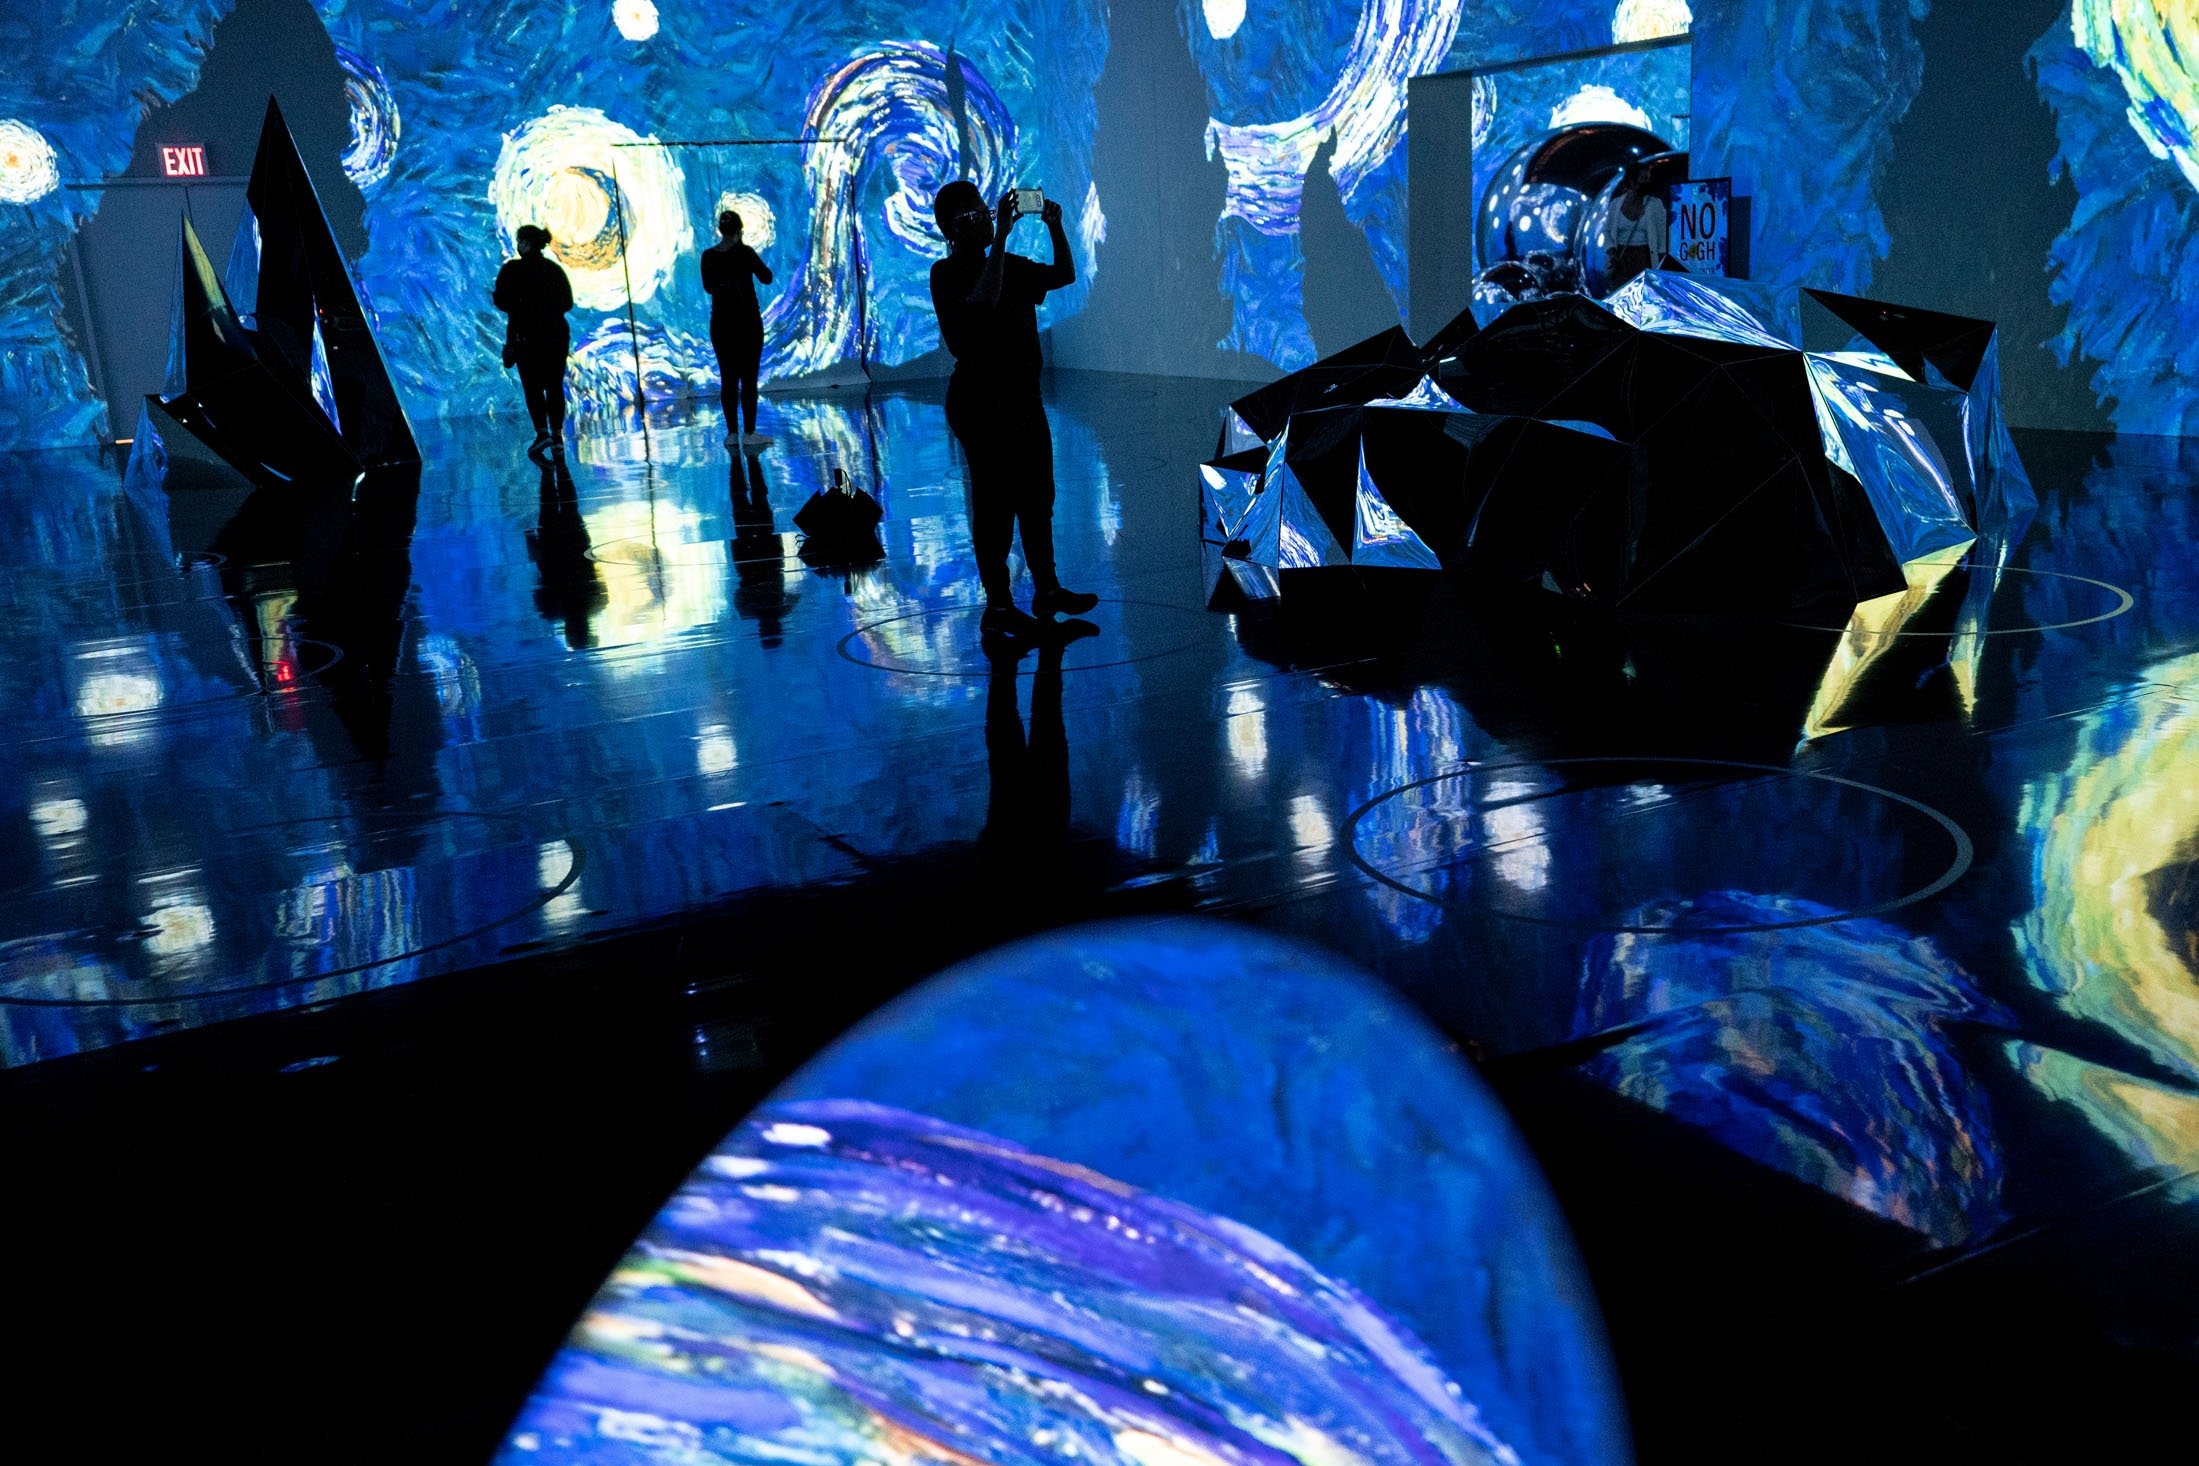 Projections of selected works of celebrated painter Vincent Van Gogh are displayed at a preview of the 'Immersive Van Gogh' exhibit at Pier 36 in New York, U.S., June 4, 2021. (AP Photo)